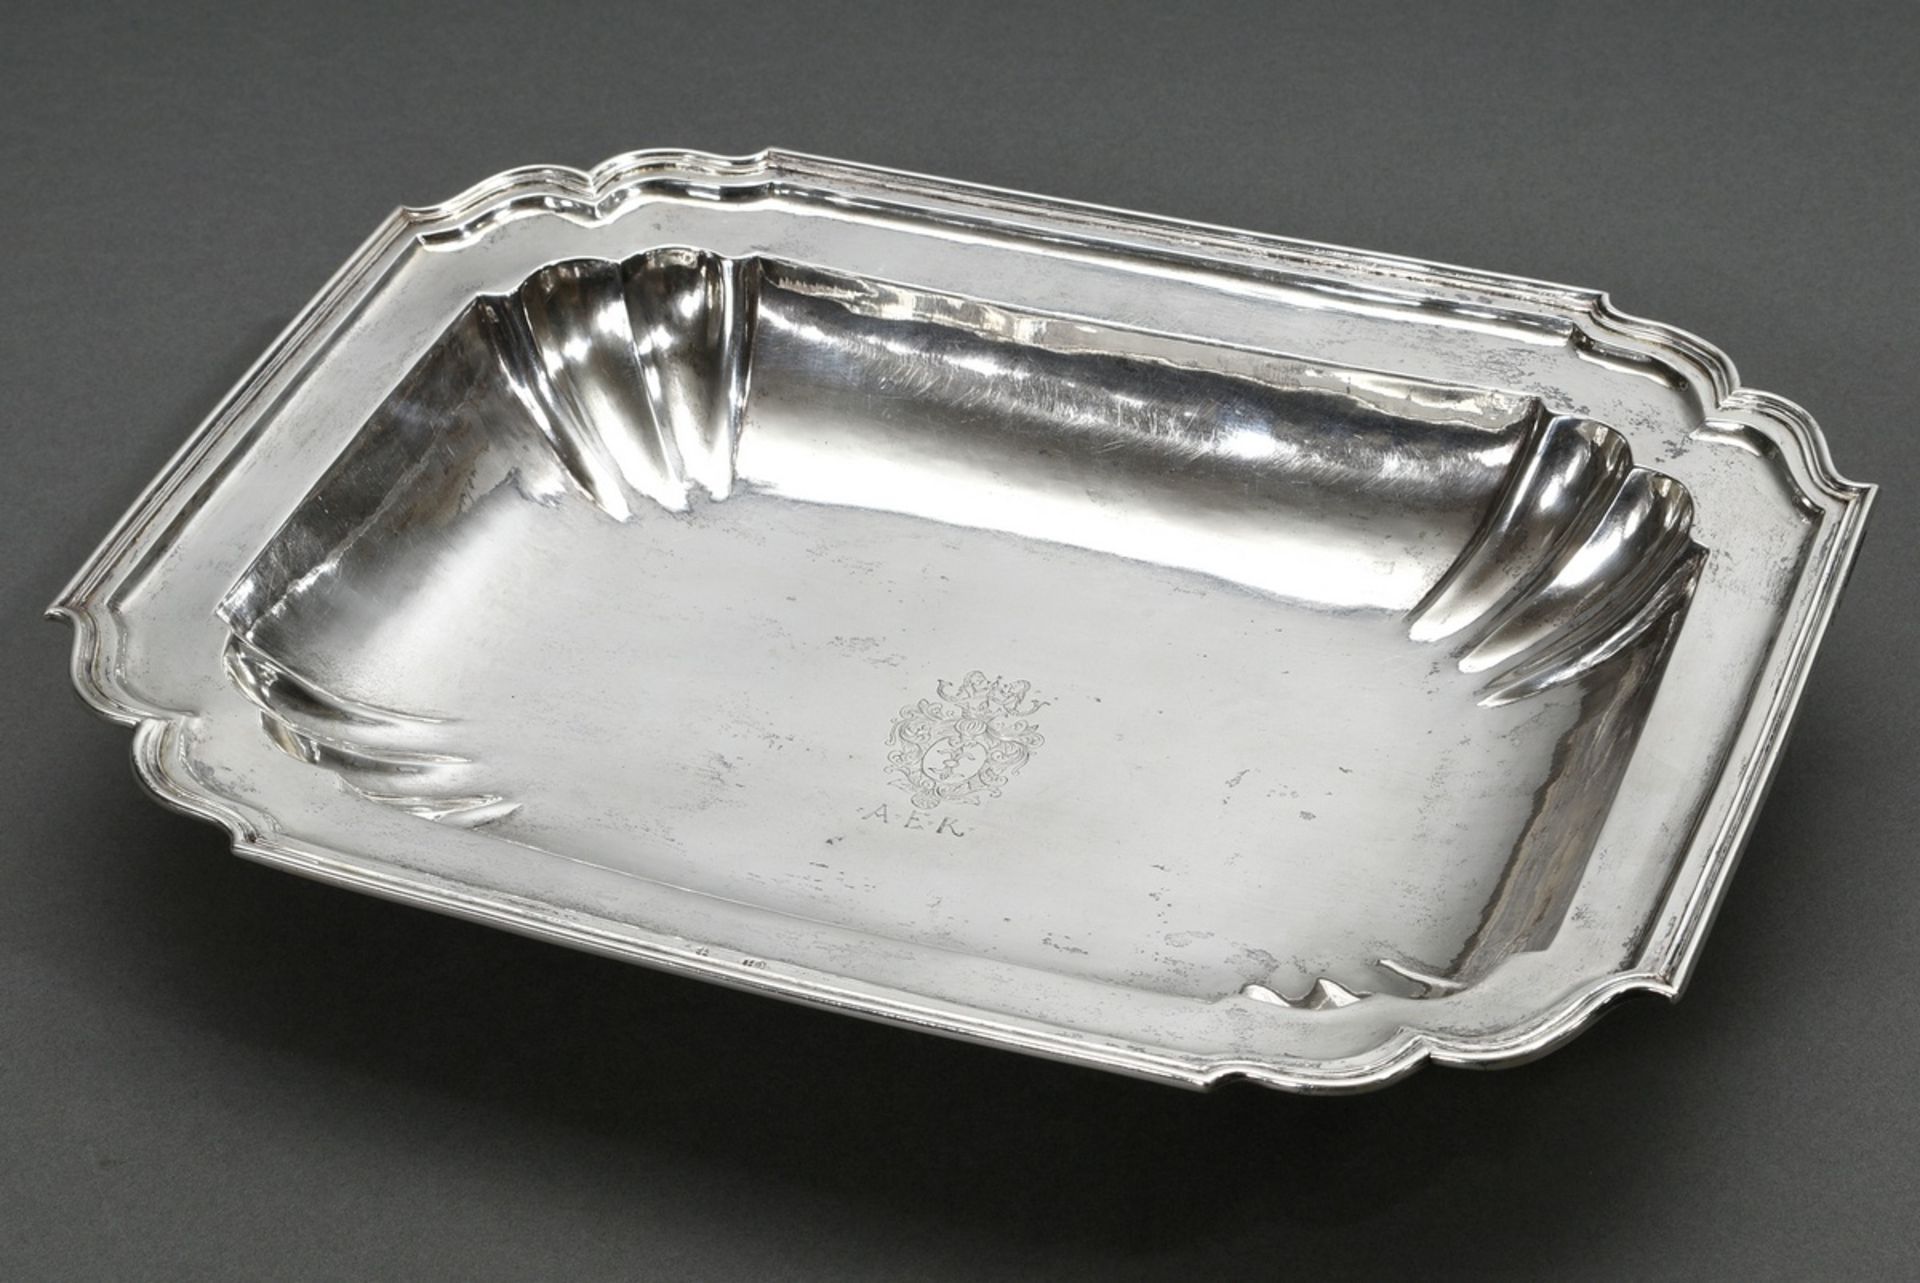 Rectangular basin with indented corners and straight lines in the cove as well as engraved noble co